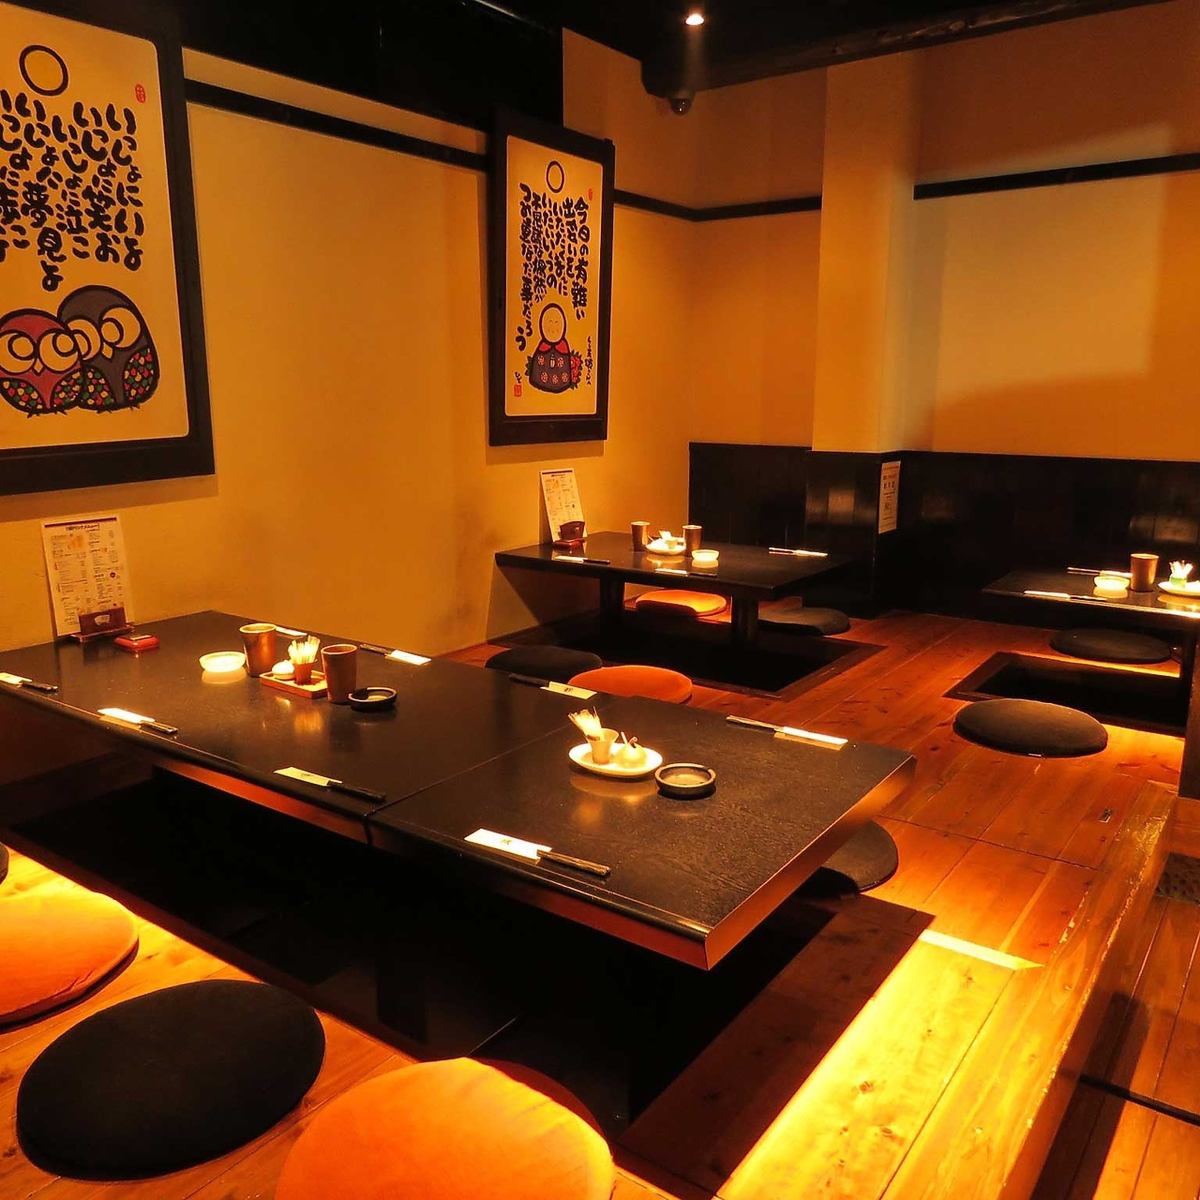 We also have sunken kotatsu seats where you can relax.